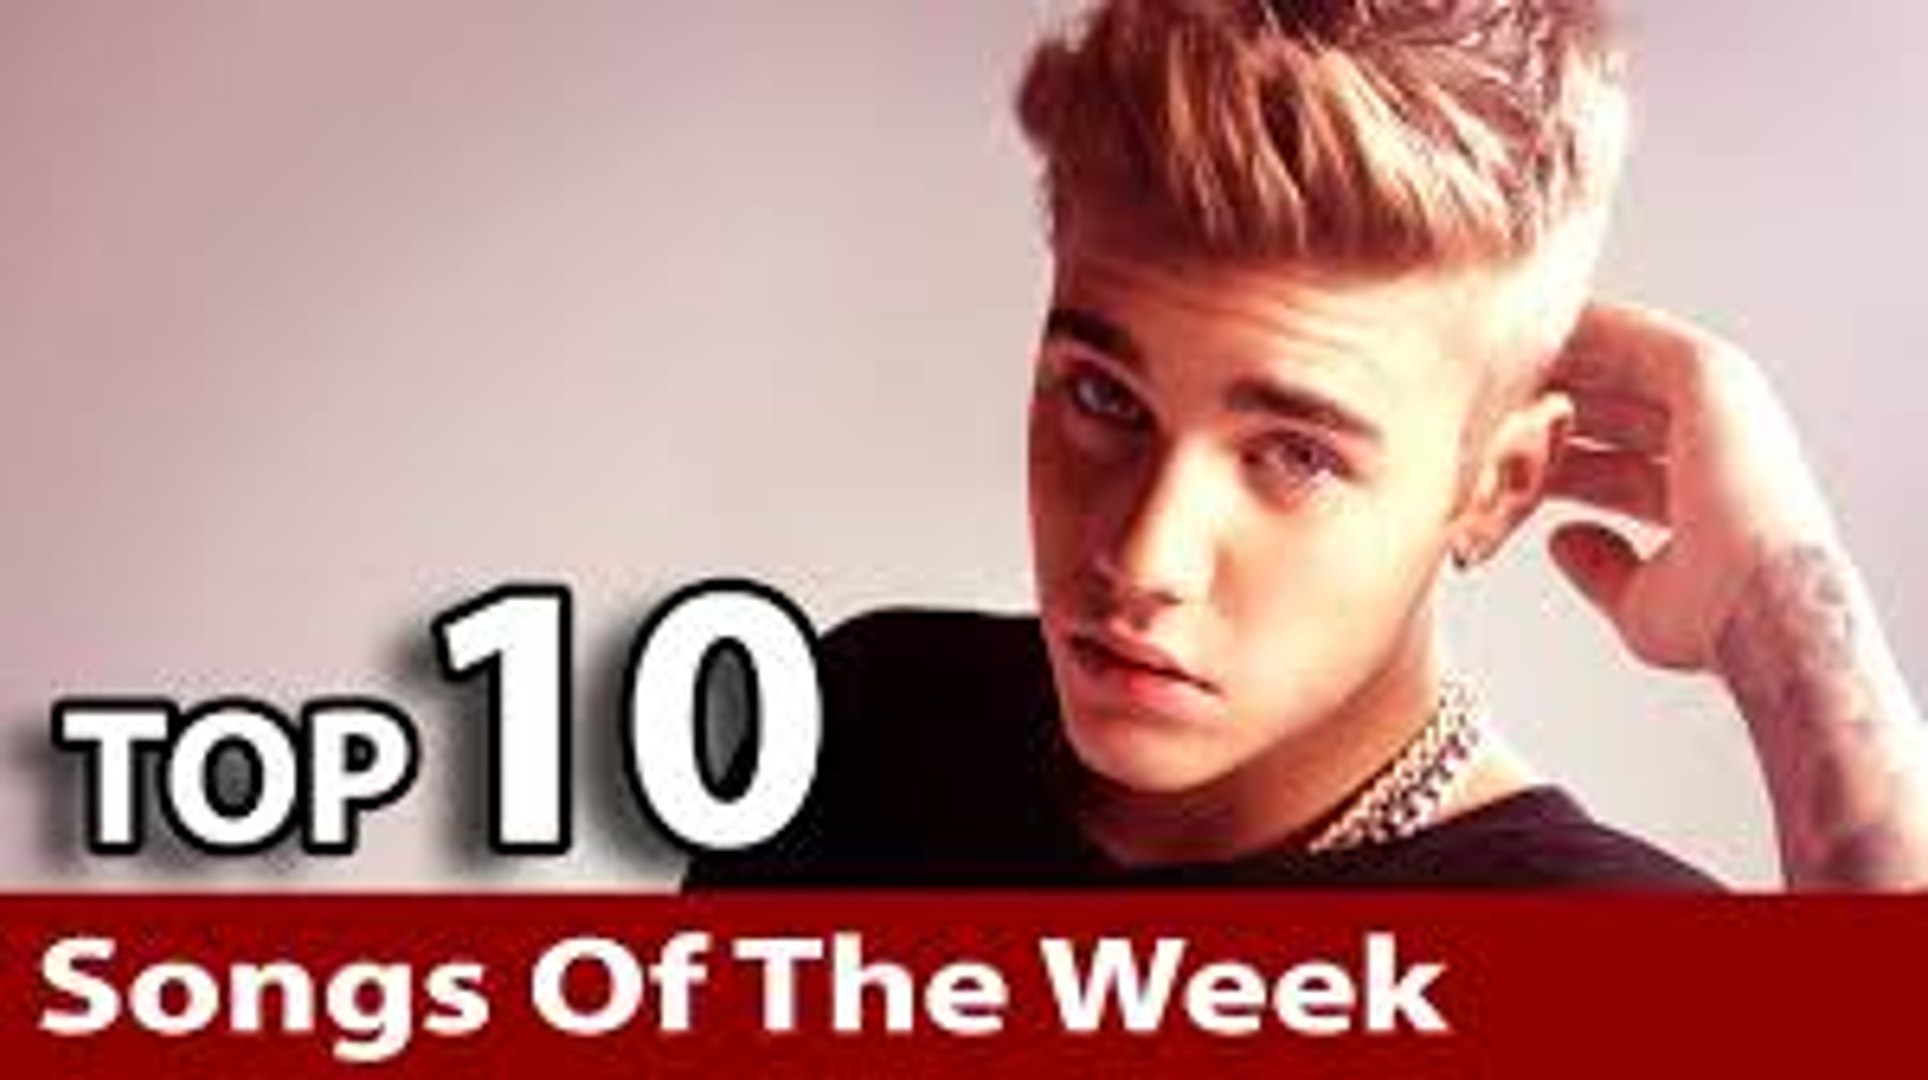 Top 10 ENGLISH Songs Of The Week - SEPTEMBER 3, 2016 (Music Video)